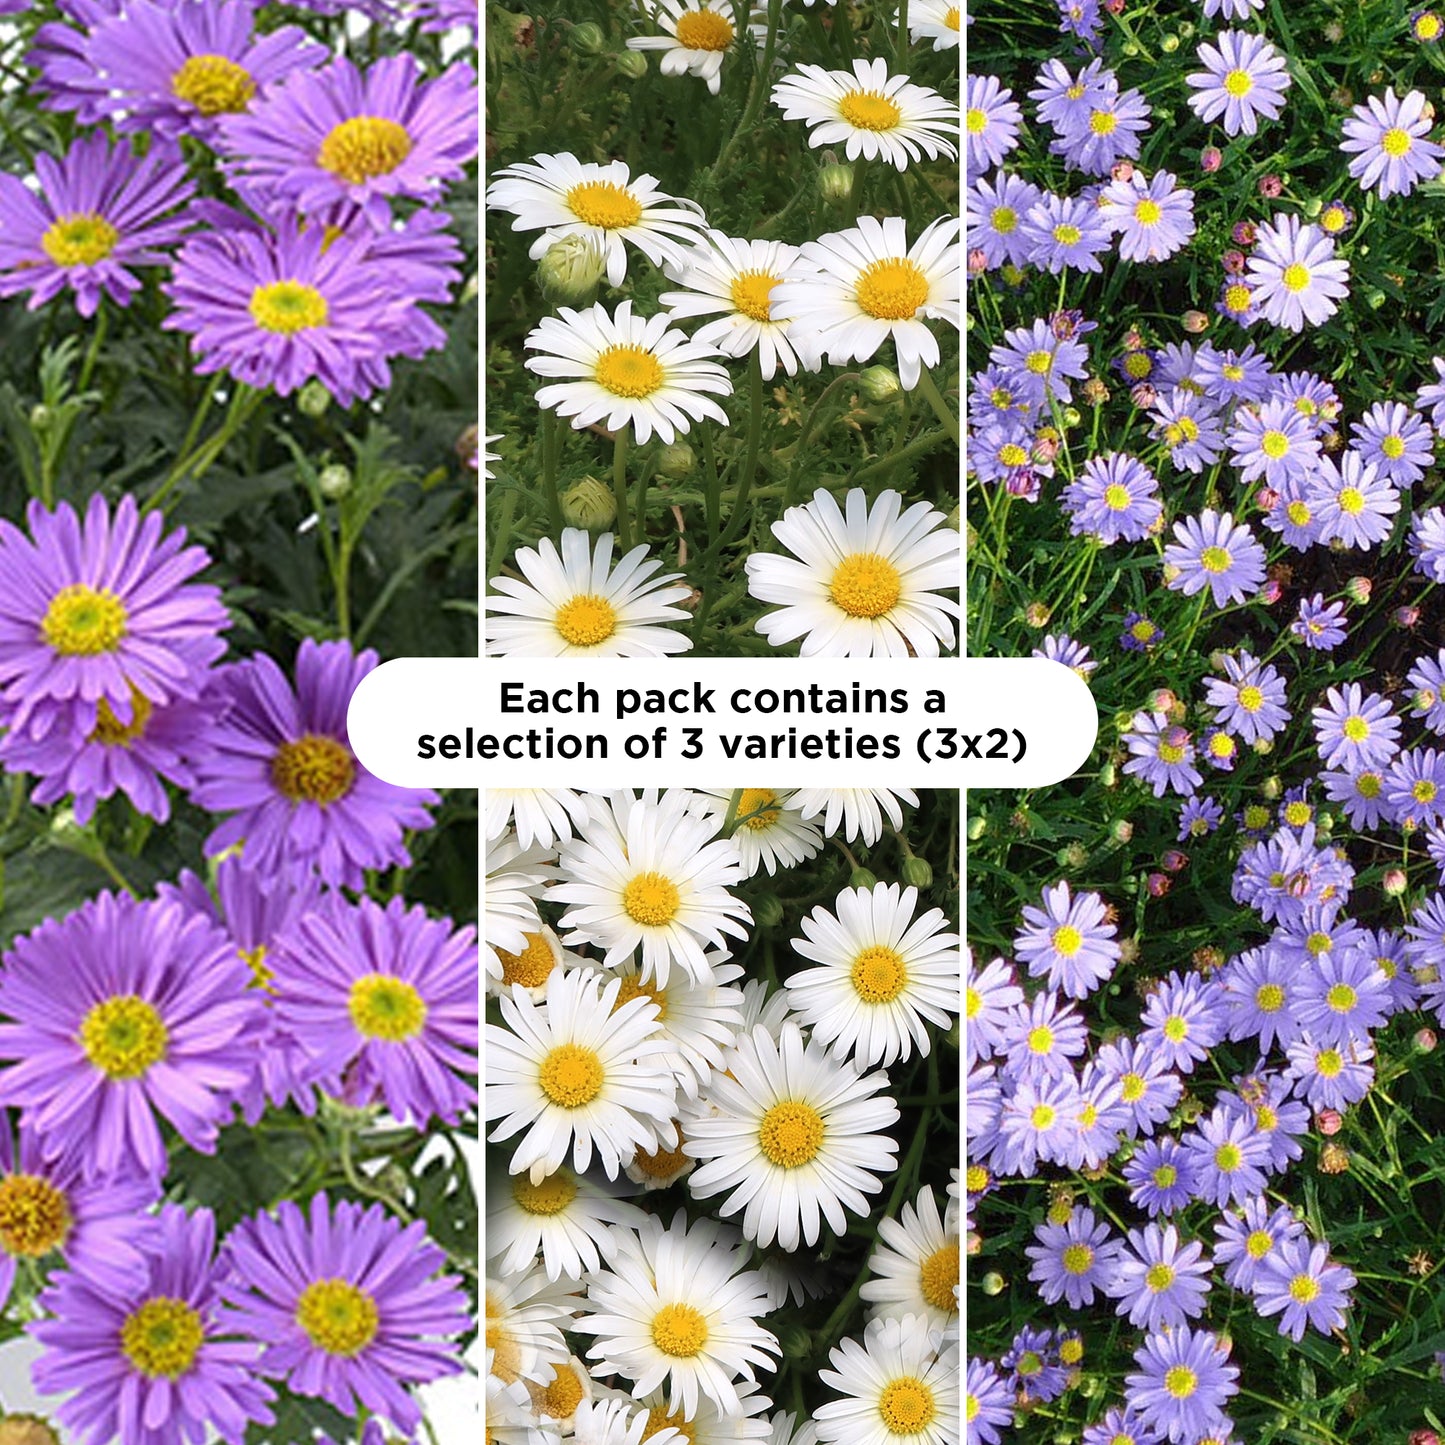 Basket Plants - Brachyscome Mixed Variety (6 Pack)